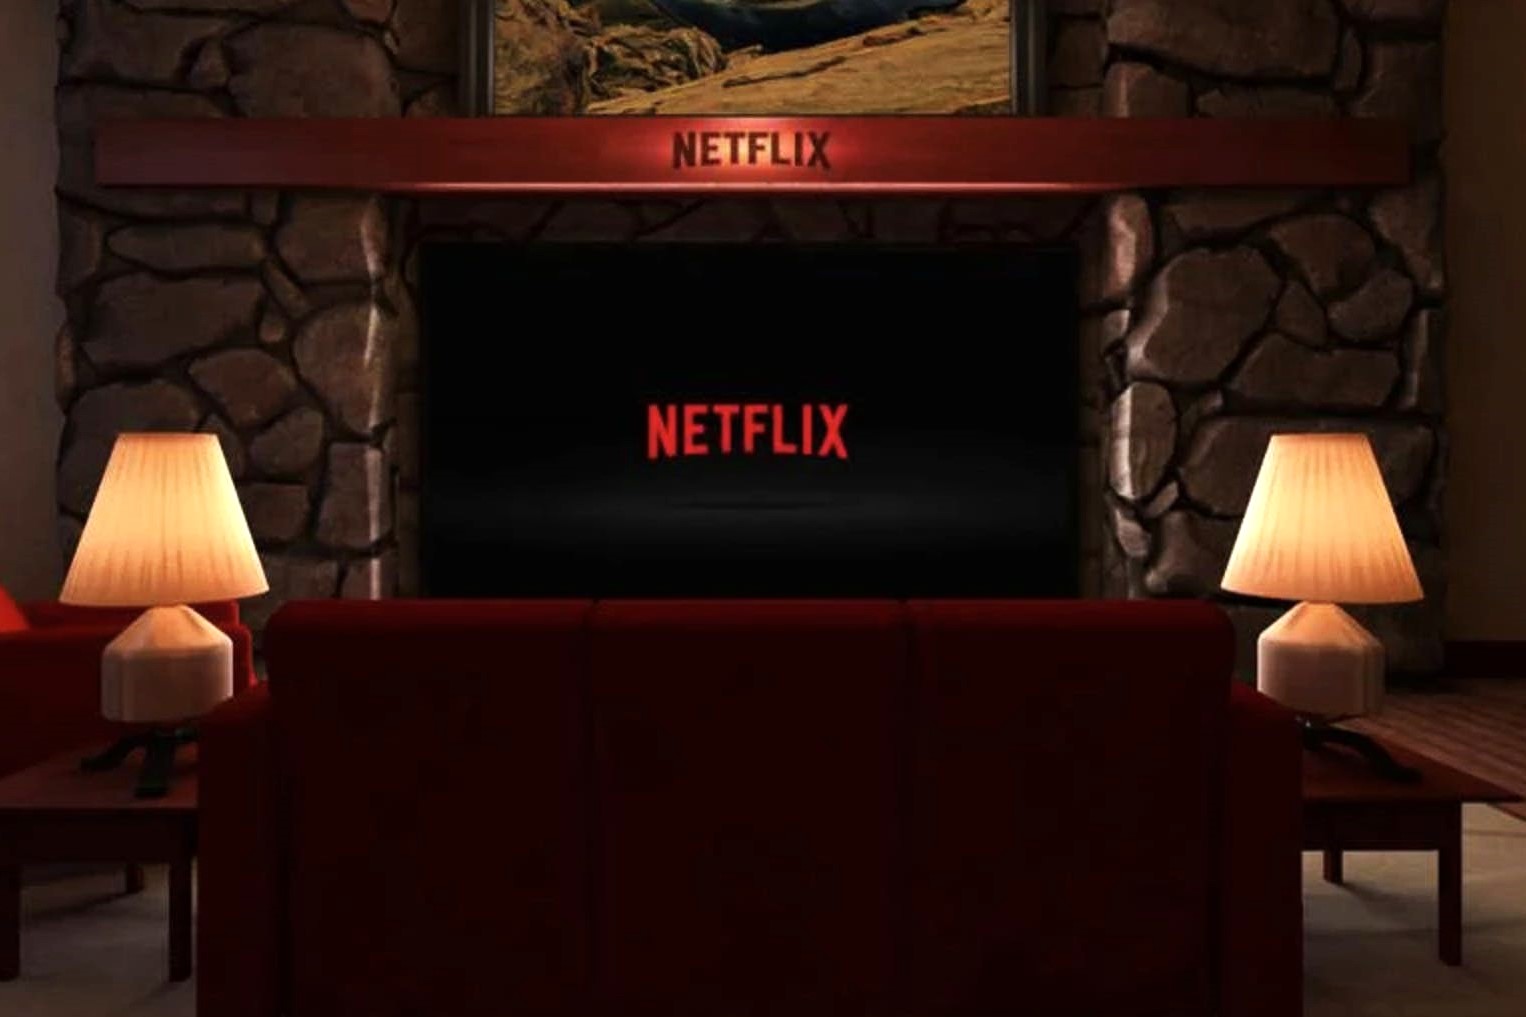 How To Play Netflix VR On PC With Oculus Rift